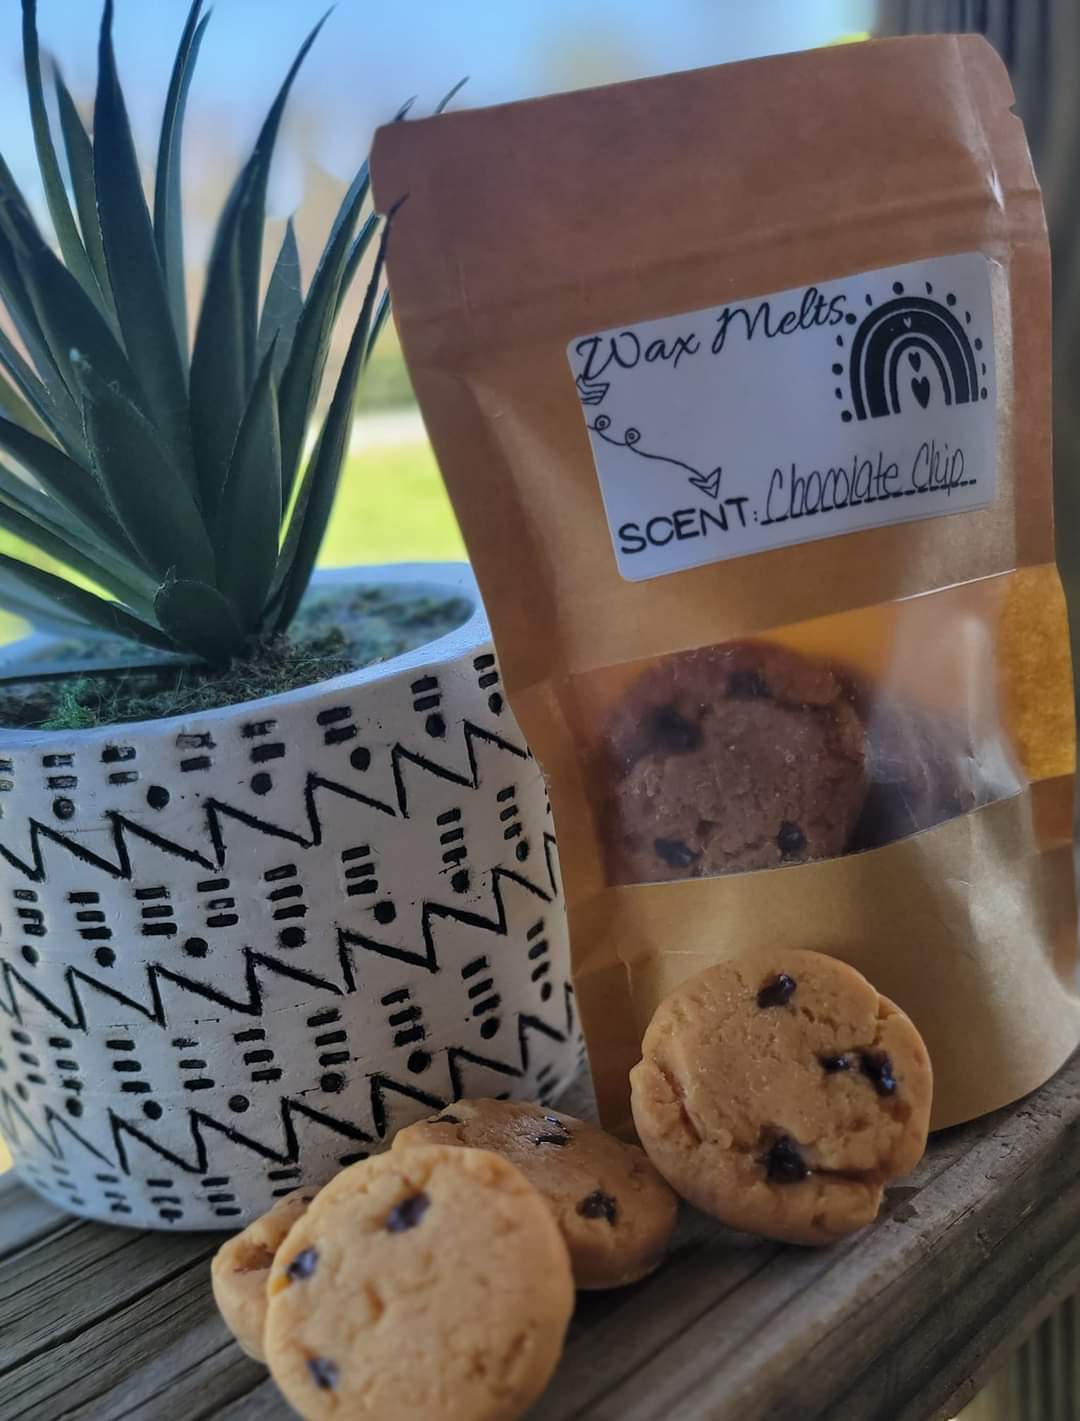 Wax melts that look and smell like chocolate chip cookies.